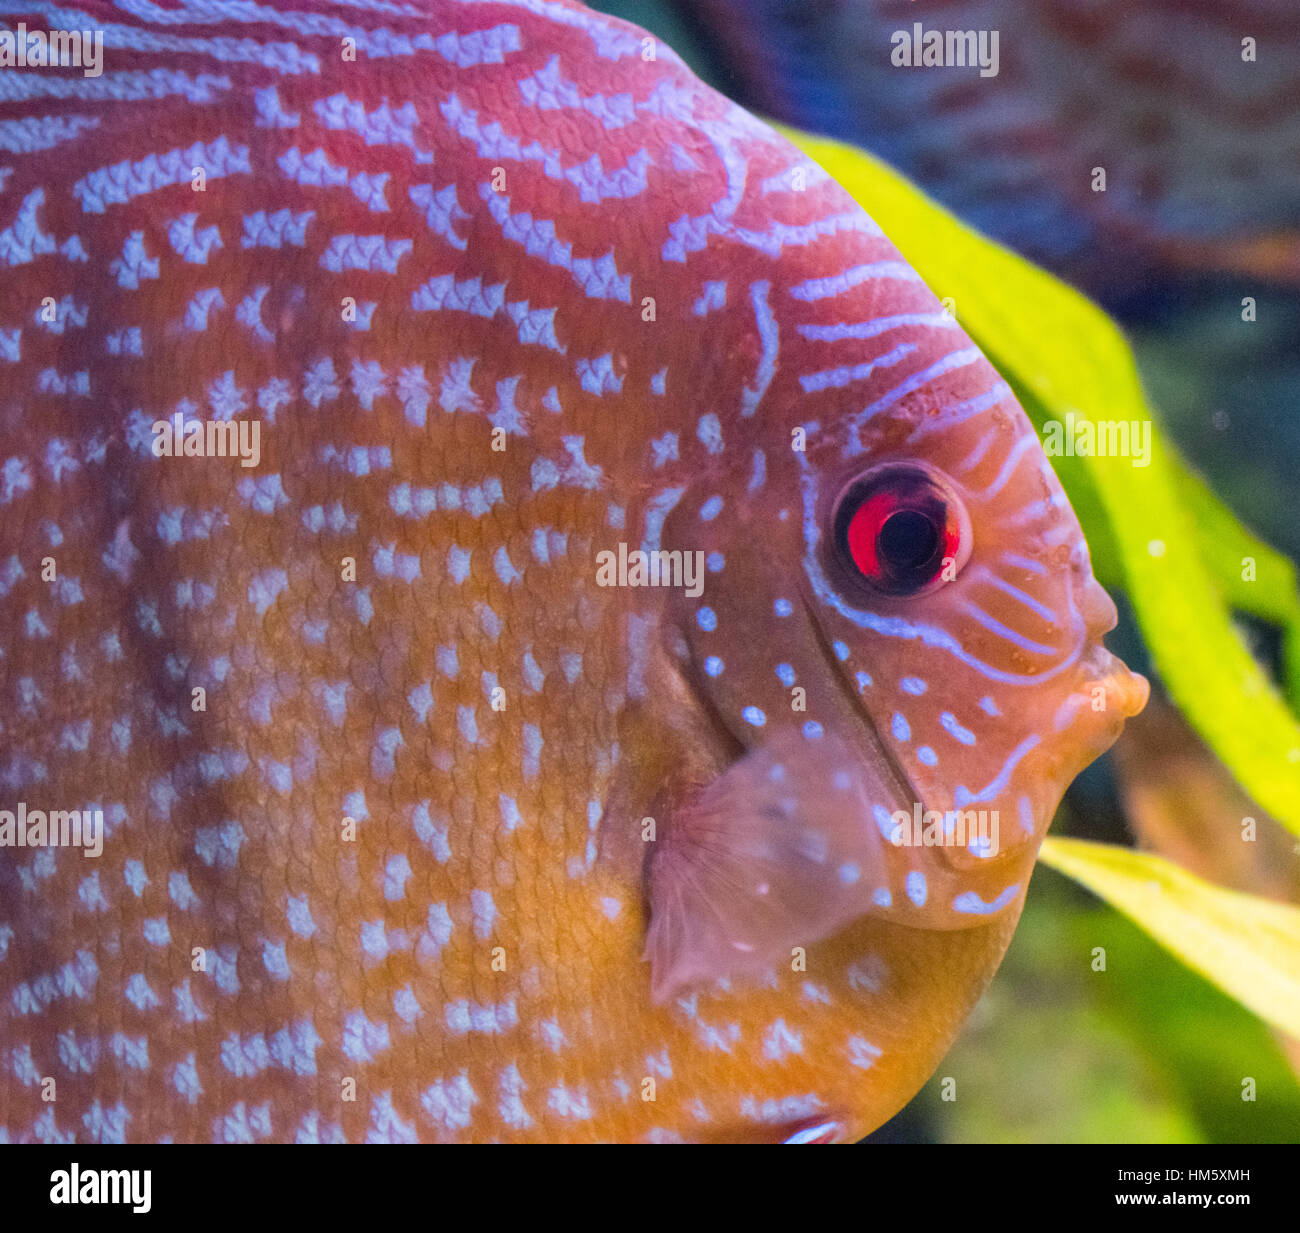 A young adult male Royal Curipeua Discus tropical fish. Stock Photo